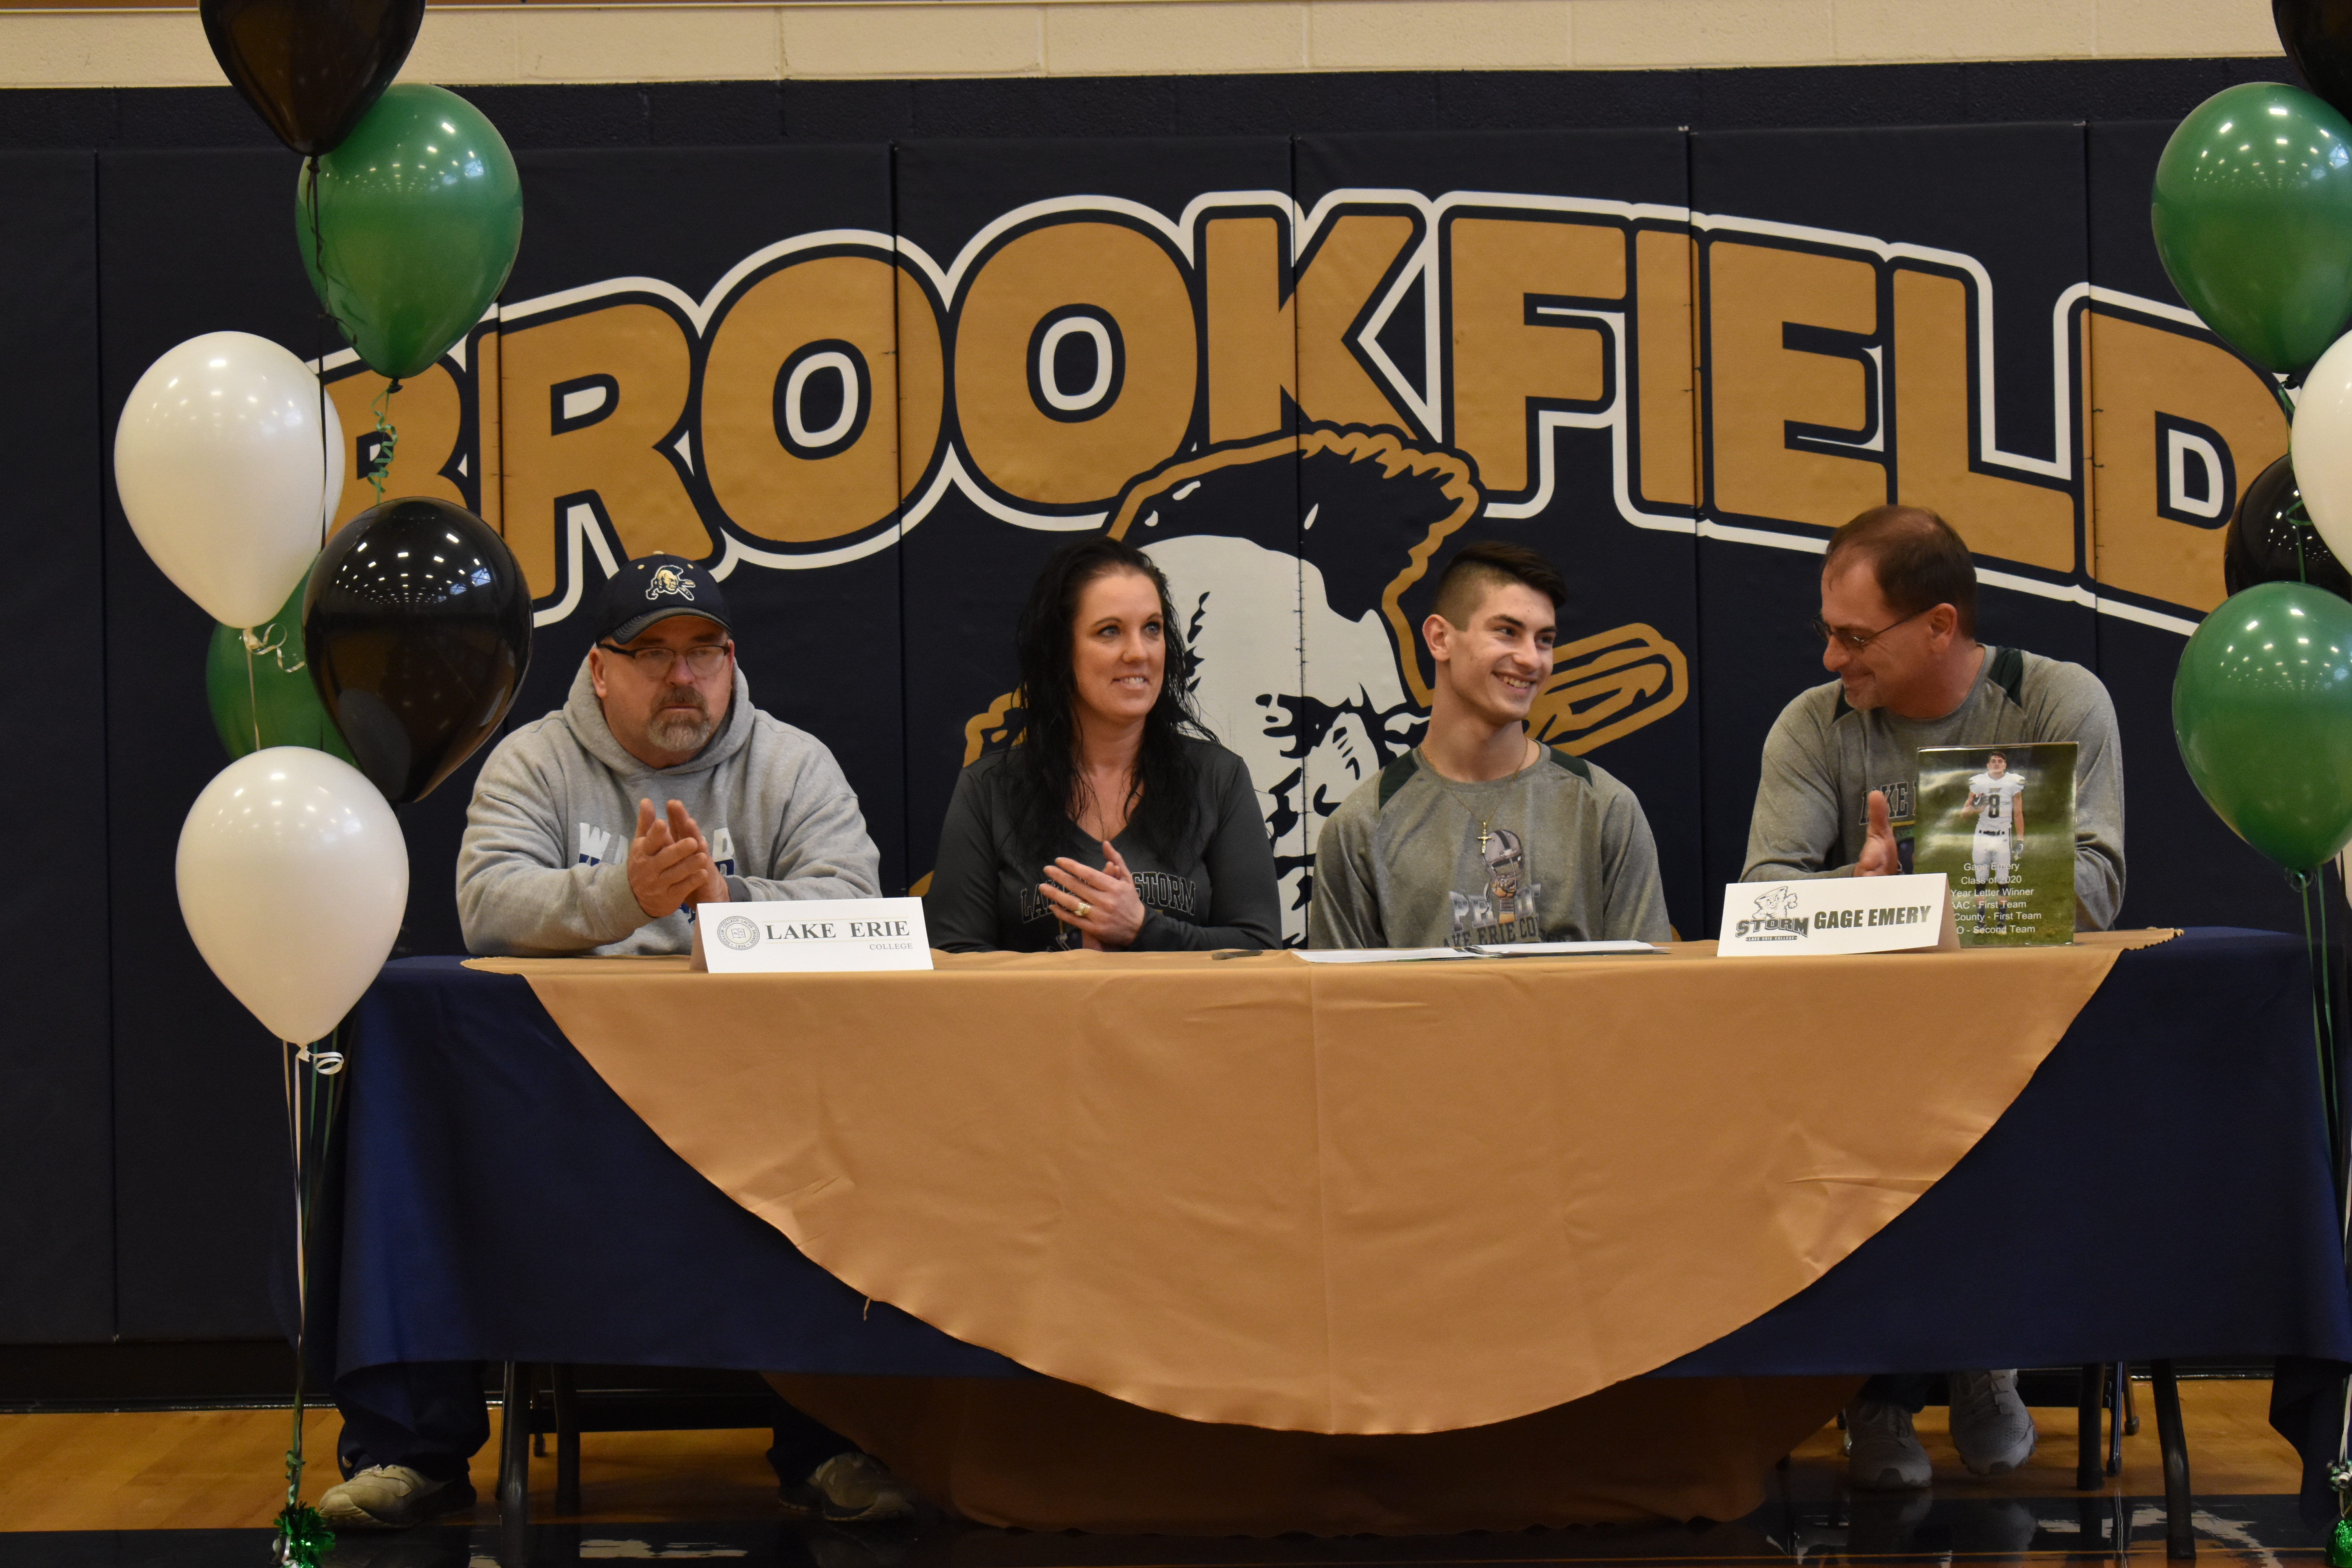 Brookfield Football Coach Randy Clark, left, and Danielle and Keith Emery applaud Brookfield High School senior Gage Emery after he signs his letter of intent to play football at Lake Erie College in Painesville.